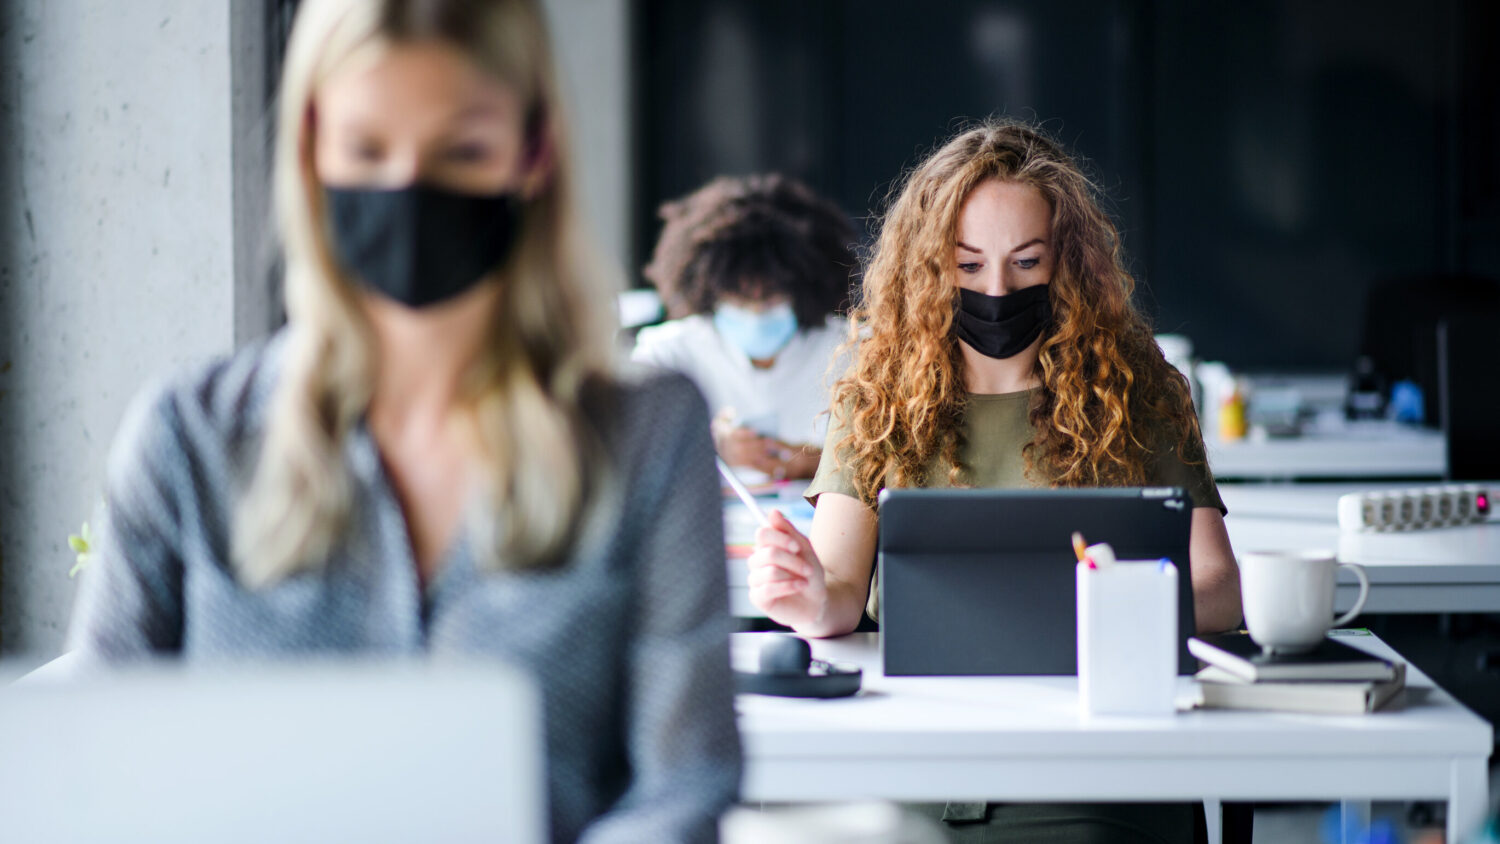 Young people with face masks back at work or school in office after lockdown.